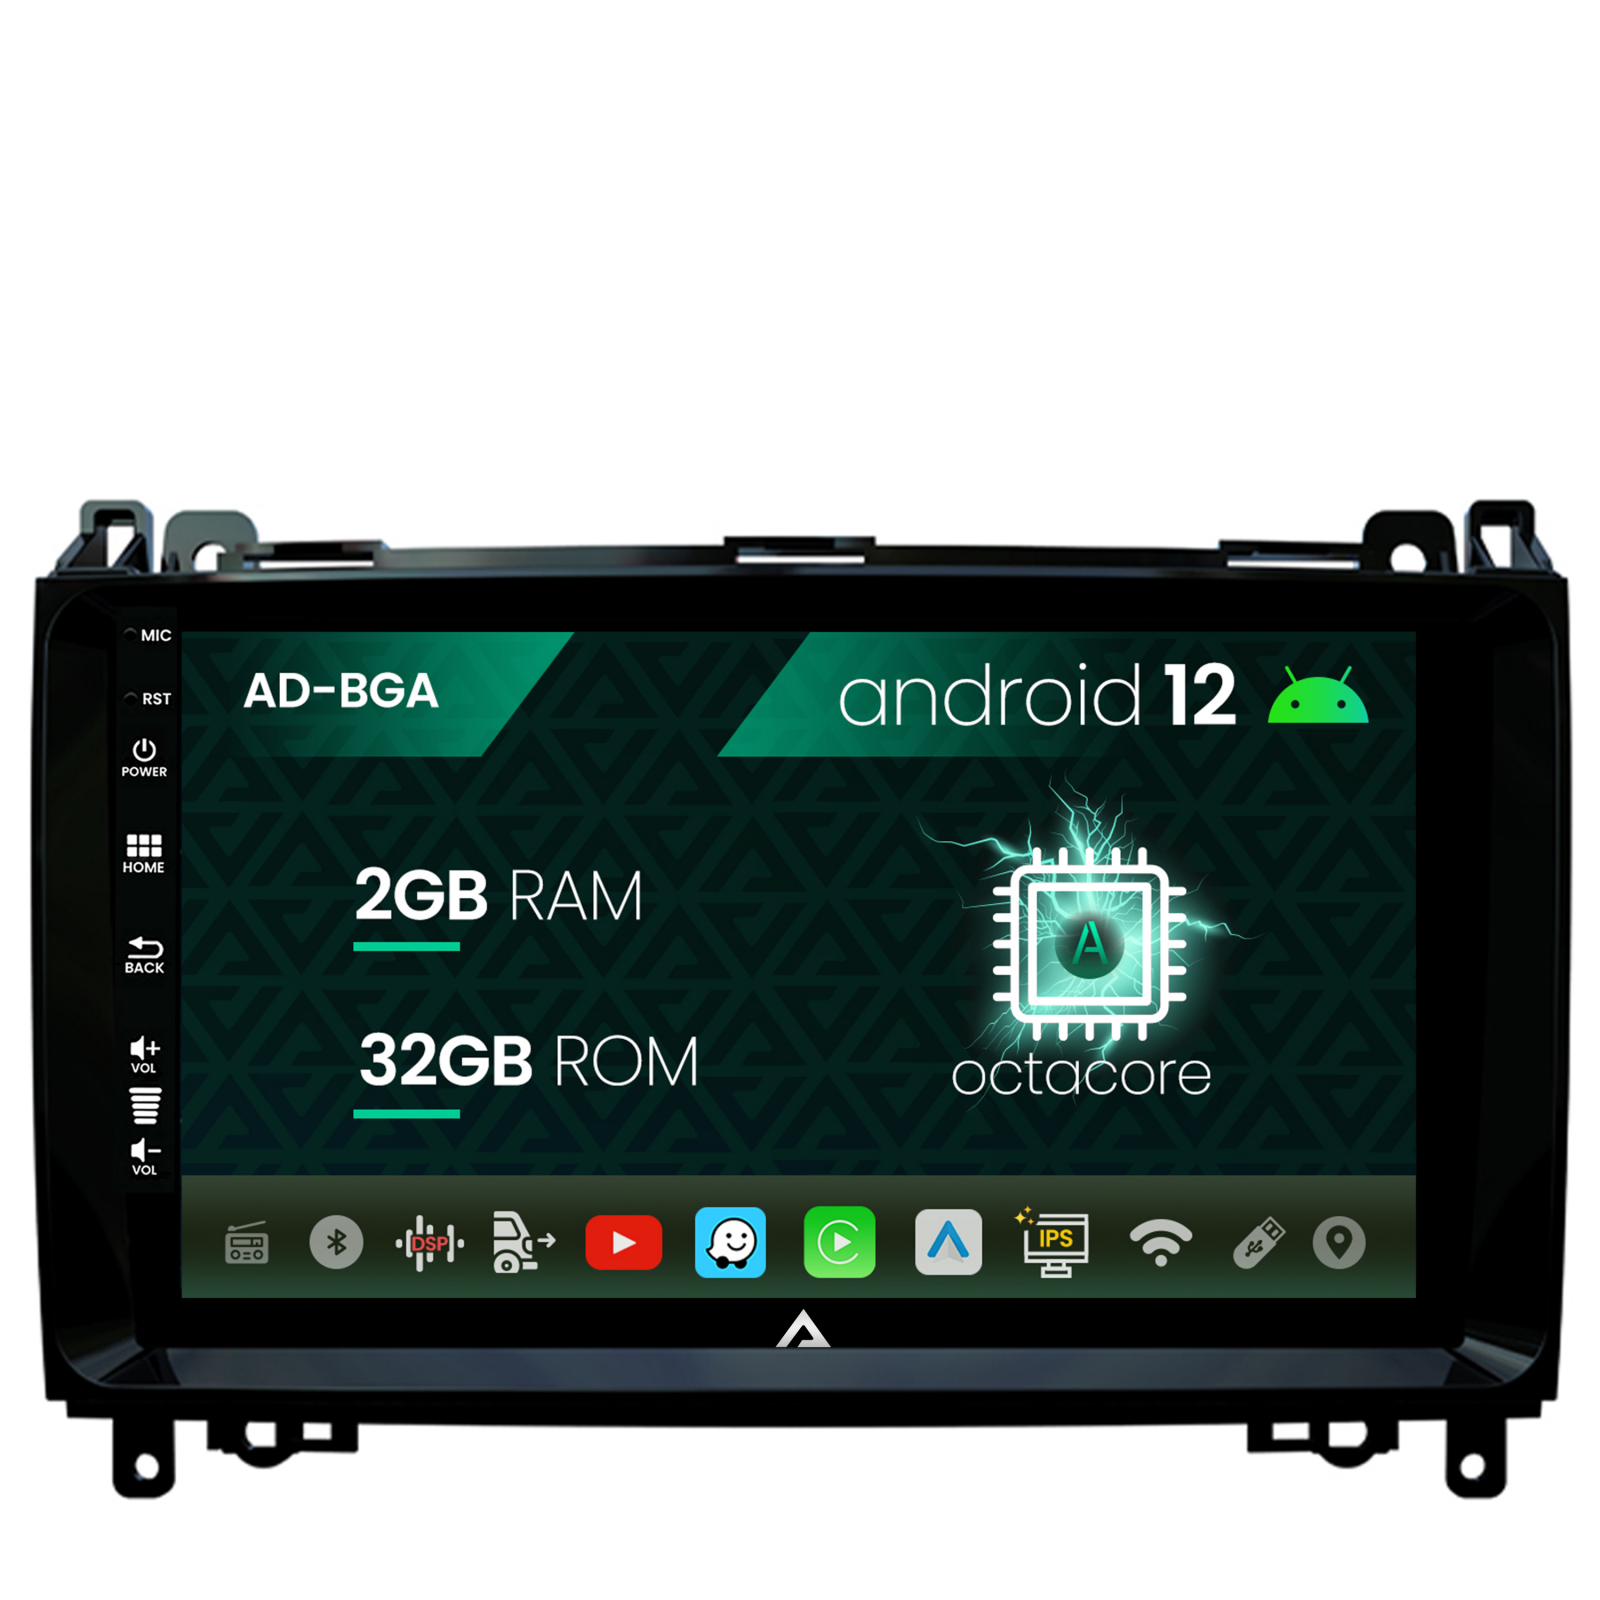 Navigatie Mercedes Benz Sprinter, Viano, Vito, A/B Class, Crafter, Android 12, A-Octacore / 2GB RAM + 32GB ROM, 9 Inch - AD-BGA9002+AD-BGRKIT407